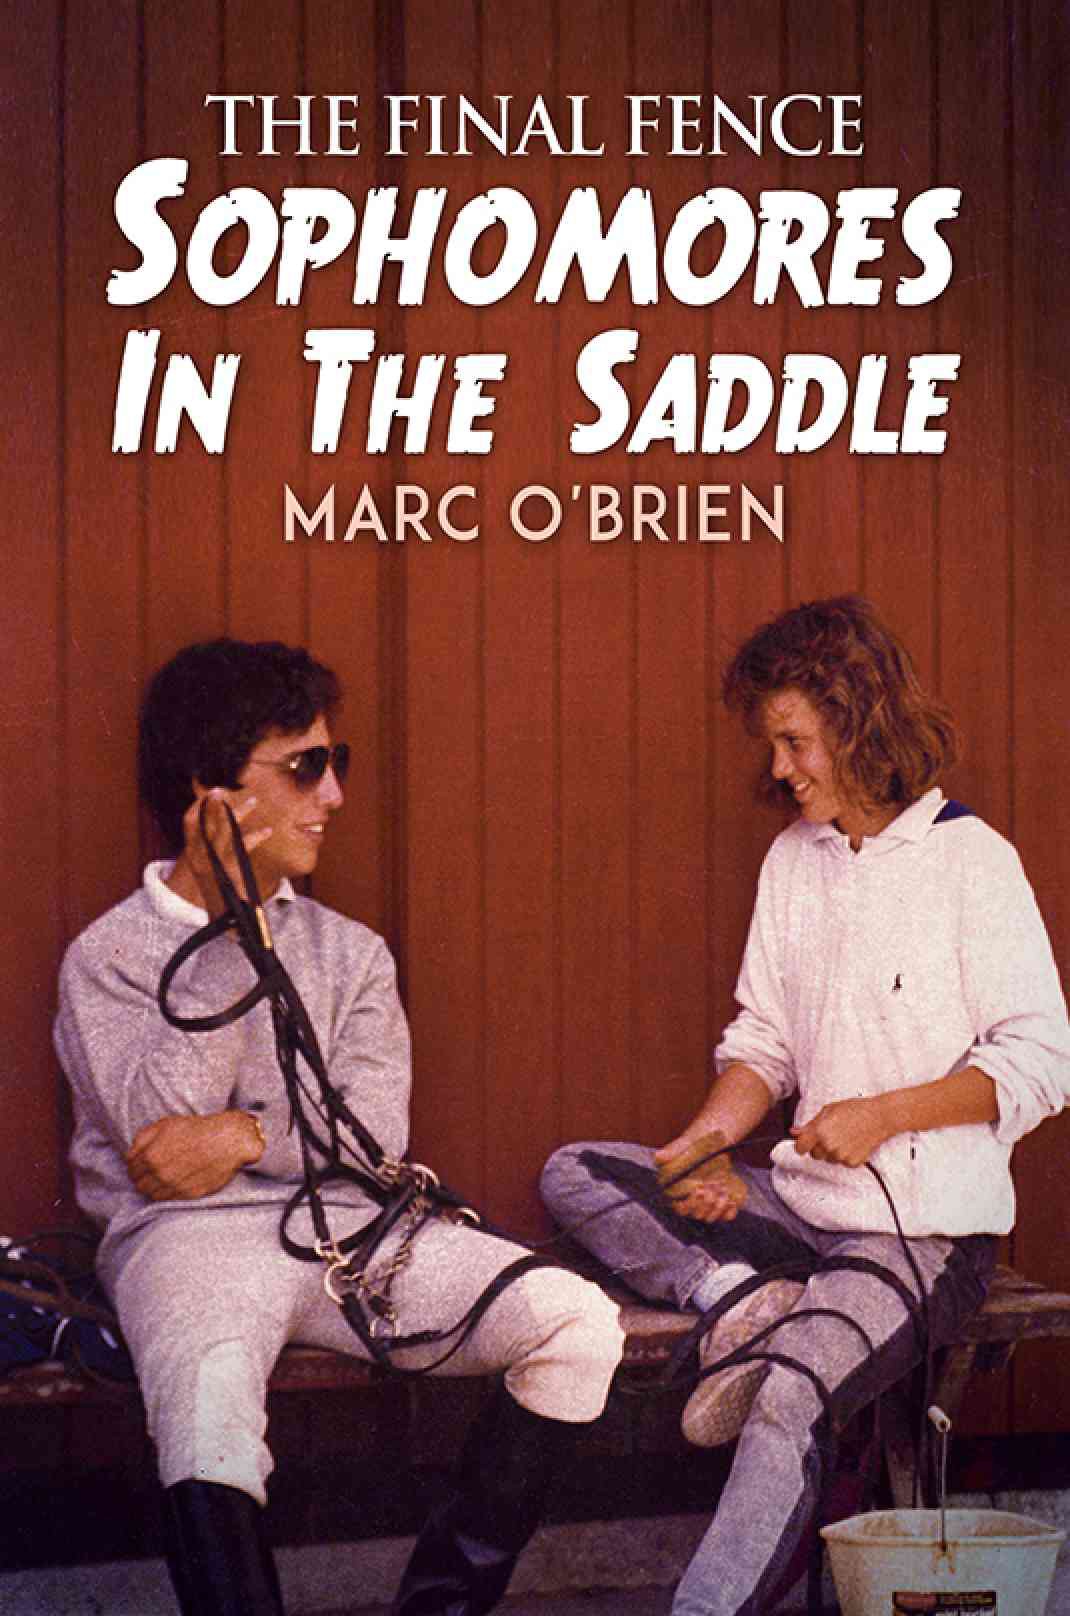 The Final Fence: Sophomores In the Saddle by Marc O'Brien Got Featured on the Website Blog LovinThe Final Fence: Sophomores In the Saddle by Marc O'Brien Got Featured on the Website Blog Lovin